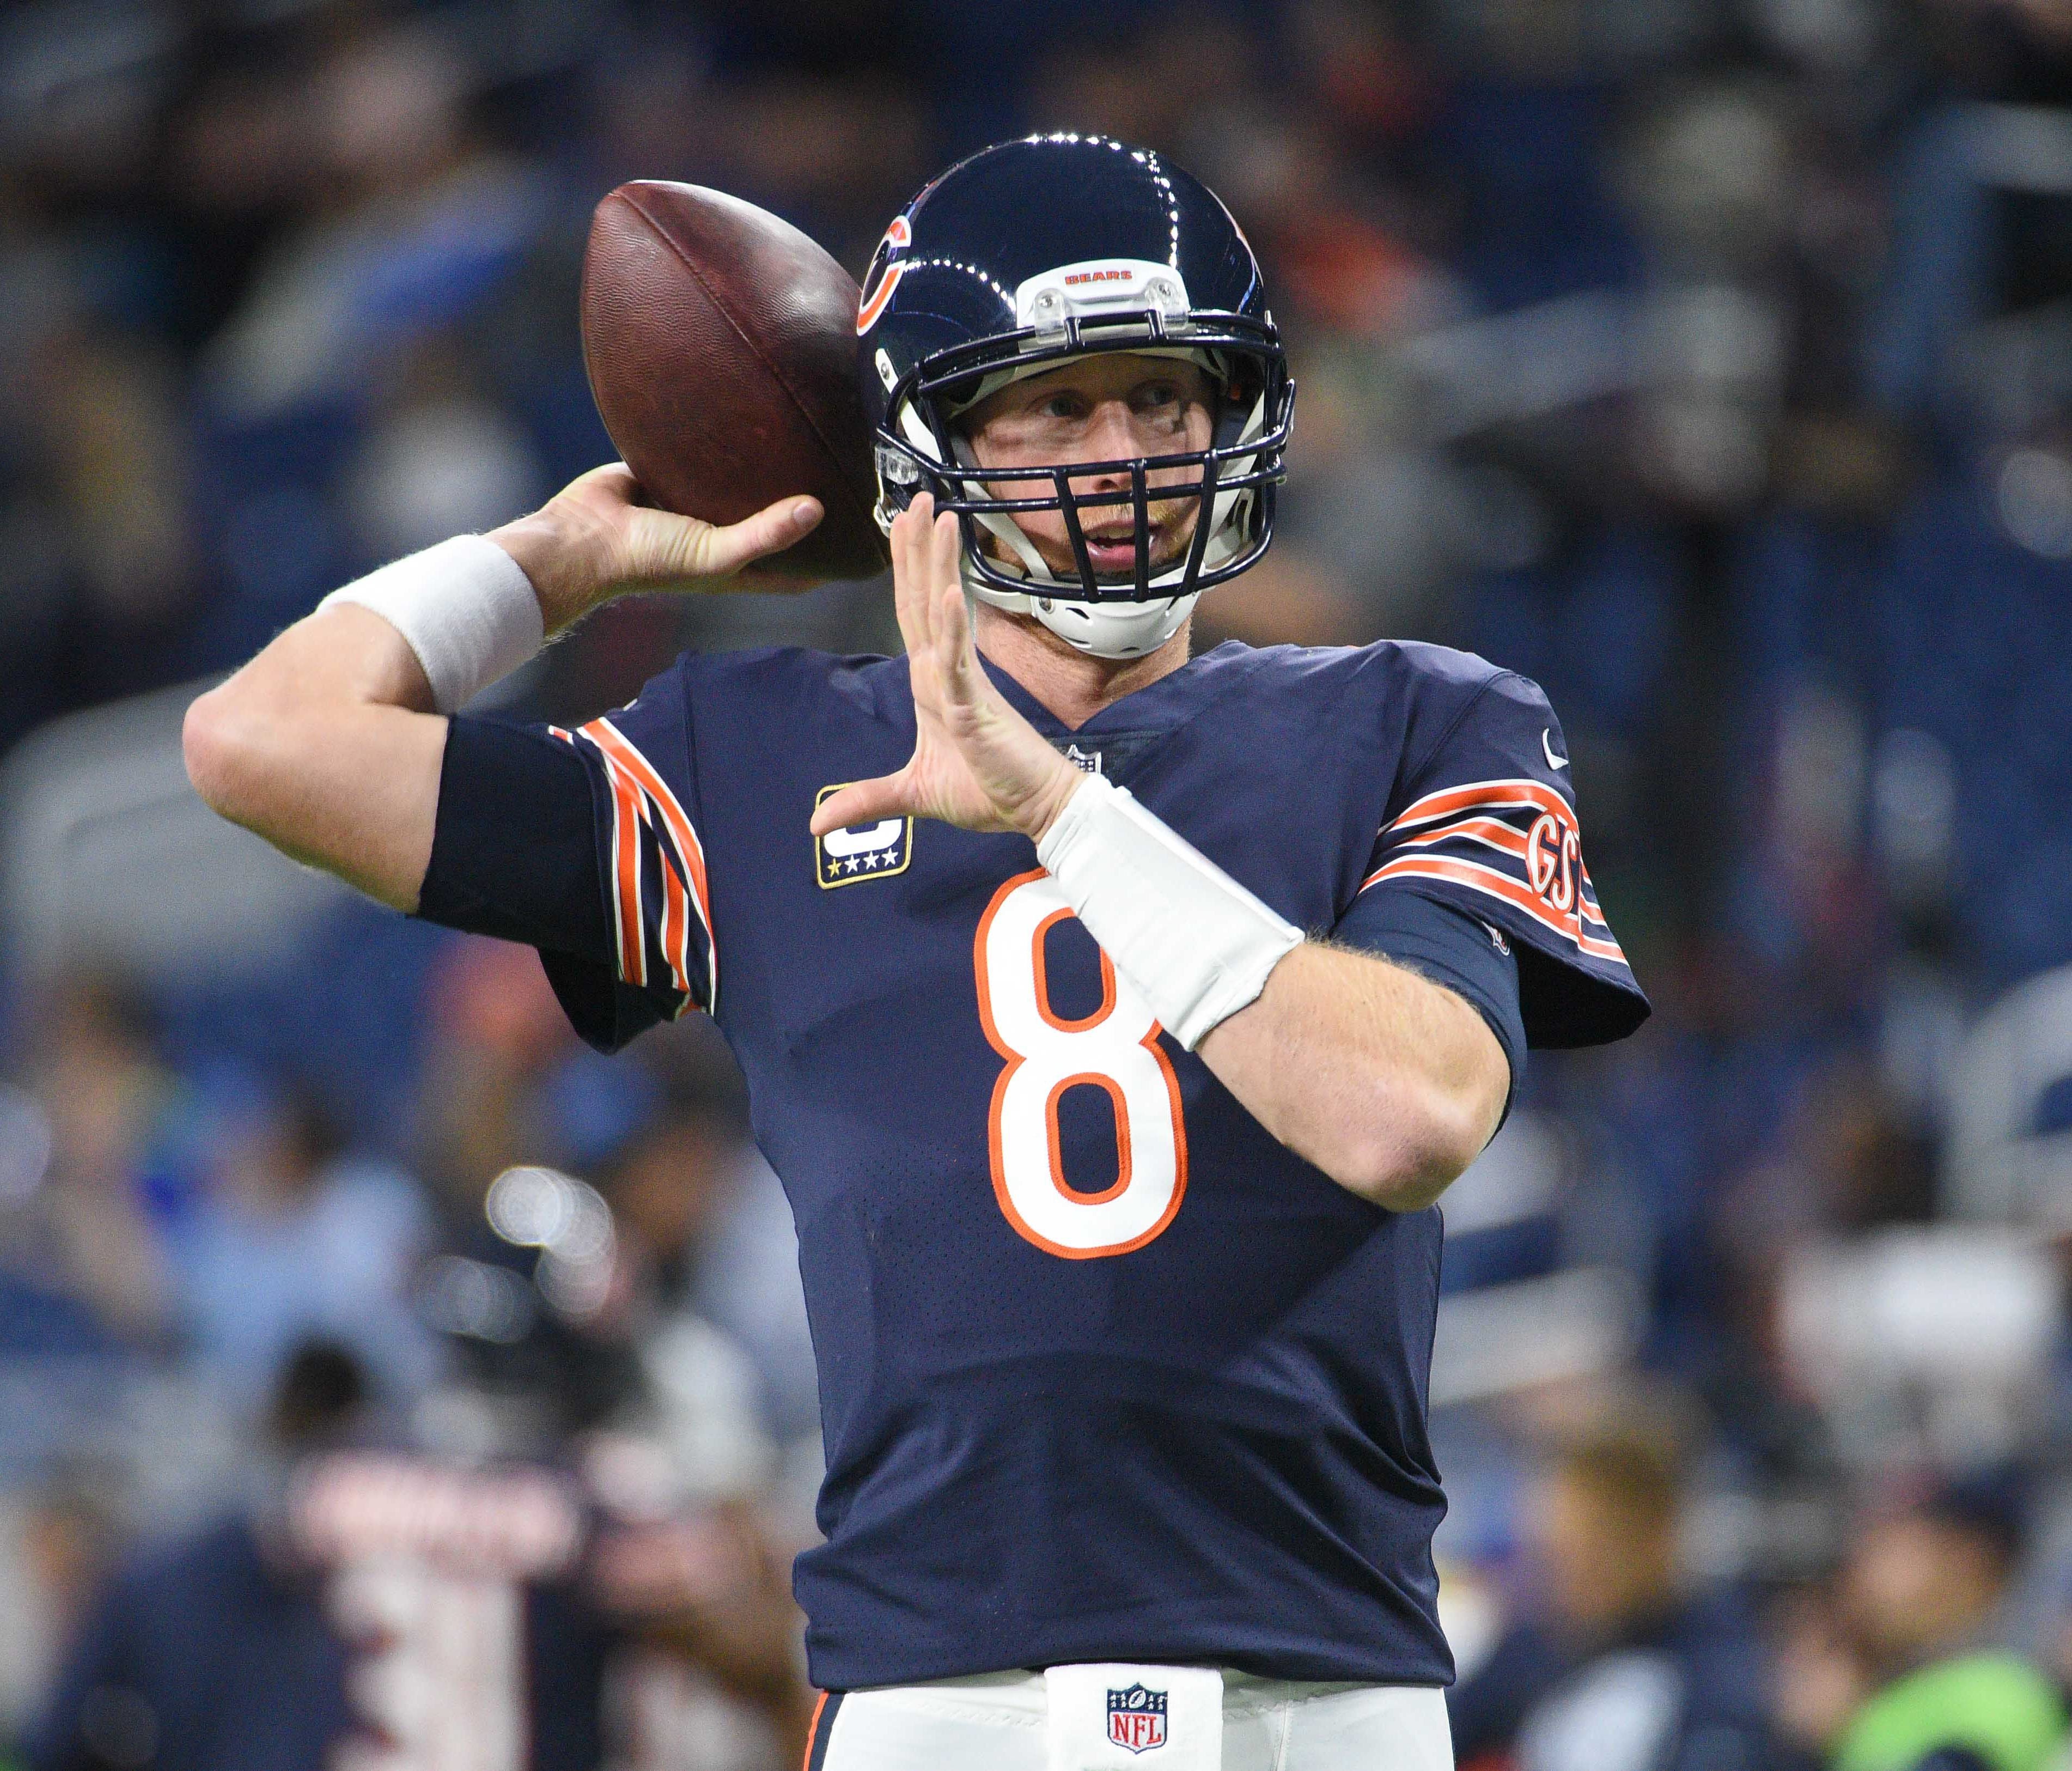 Chicago Bears quarterback Mike Glennon (8) warms up before the game against the Detroit Lions at Ford Field.